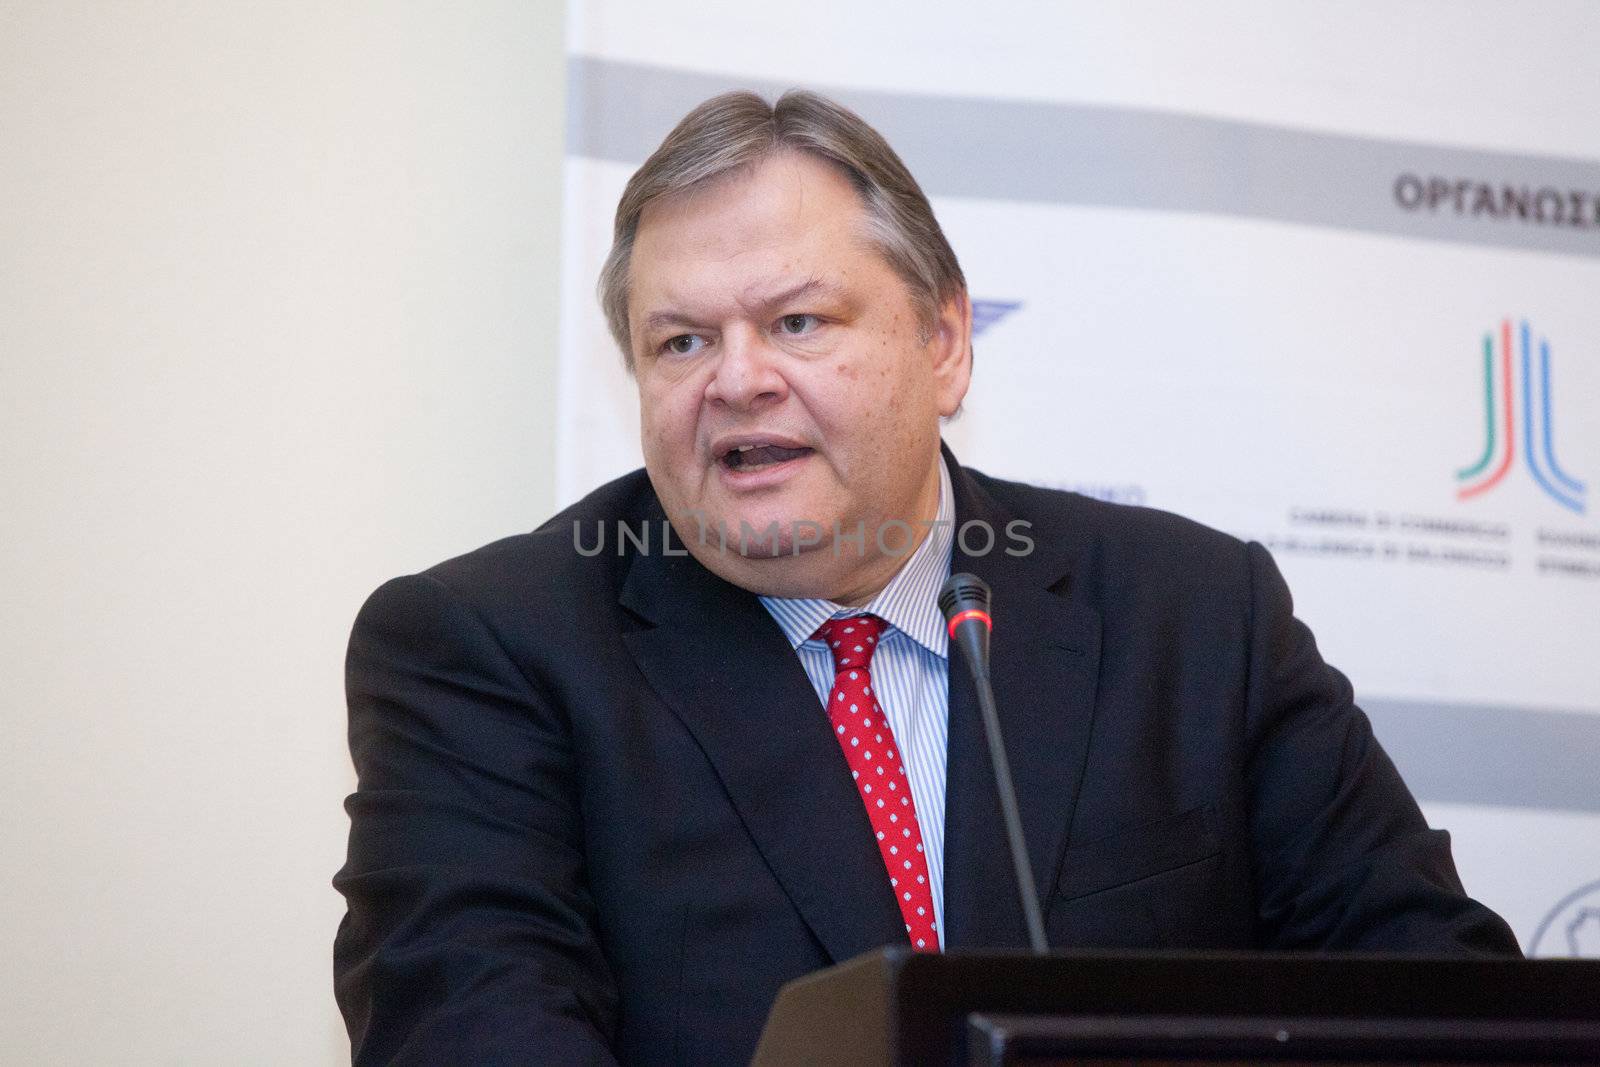 Evaggelos Venizelos, Greek Minister of Finance gives his speech by Portokalis